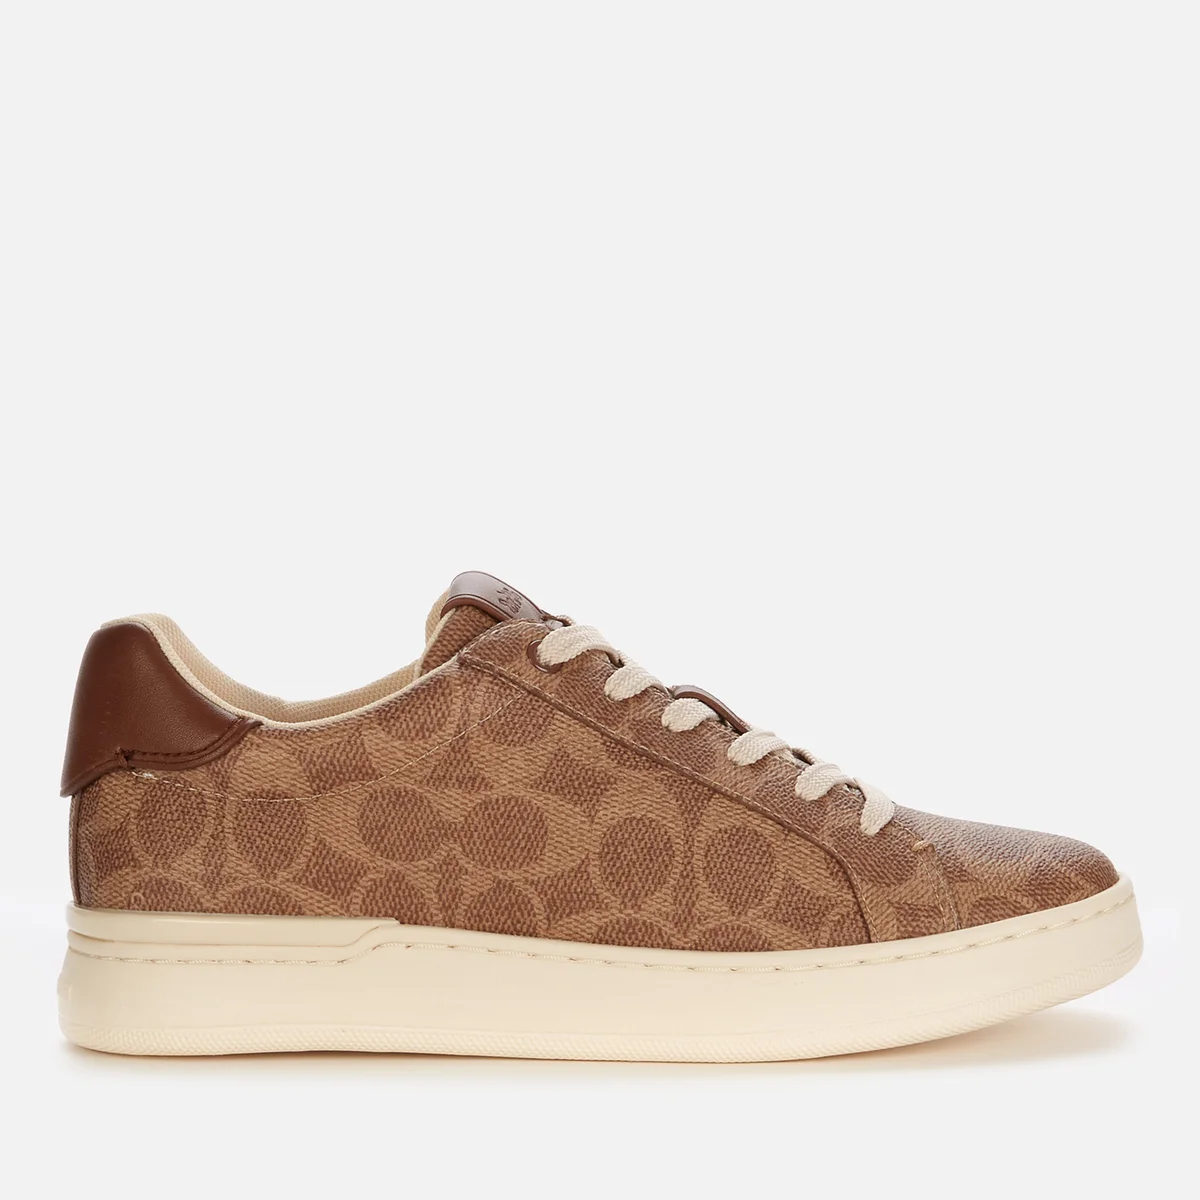 Coach Women's Lowline Coated Canvas Trainers - Tan Image 1